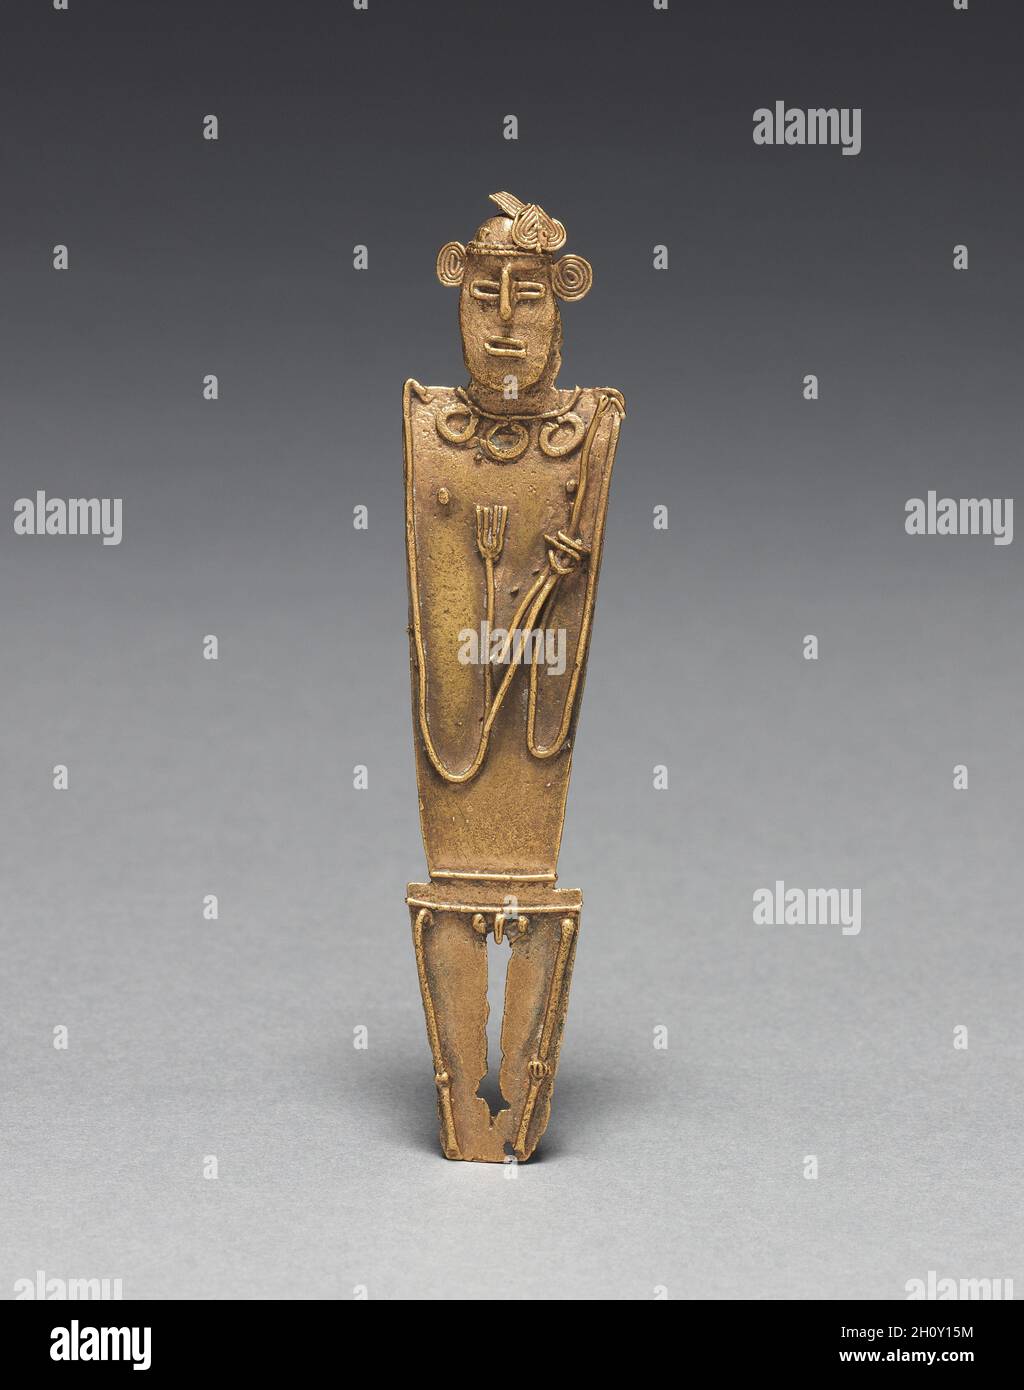 Tunjos (Votive Offering Figurine), c. 900-1550. Colombia, Muisca style, 10th-16th century. Cast gold; overall: 9.5 x 2.2 x 0.8 cm (3 3/4 x 7/8 x 5/16 in.).  Unlike the other gold ornaments made in the isthmian region, tunjos were not worn; instead, they served as offerings that were deposited in sacred places such as lagoons and caves. They often depict humans who hold something. Perhaps because they were not meant for display, tunjos were not finished after lost-wax casting. Flaws remain uncorrected, surfaces are unpolished, and gold that backed into the channel used to pour the molten metal Stock Photo